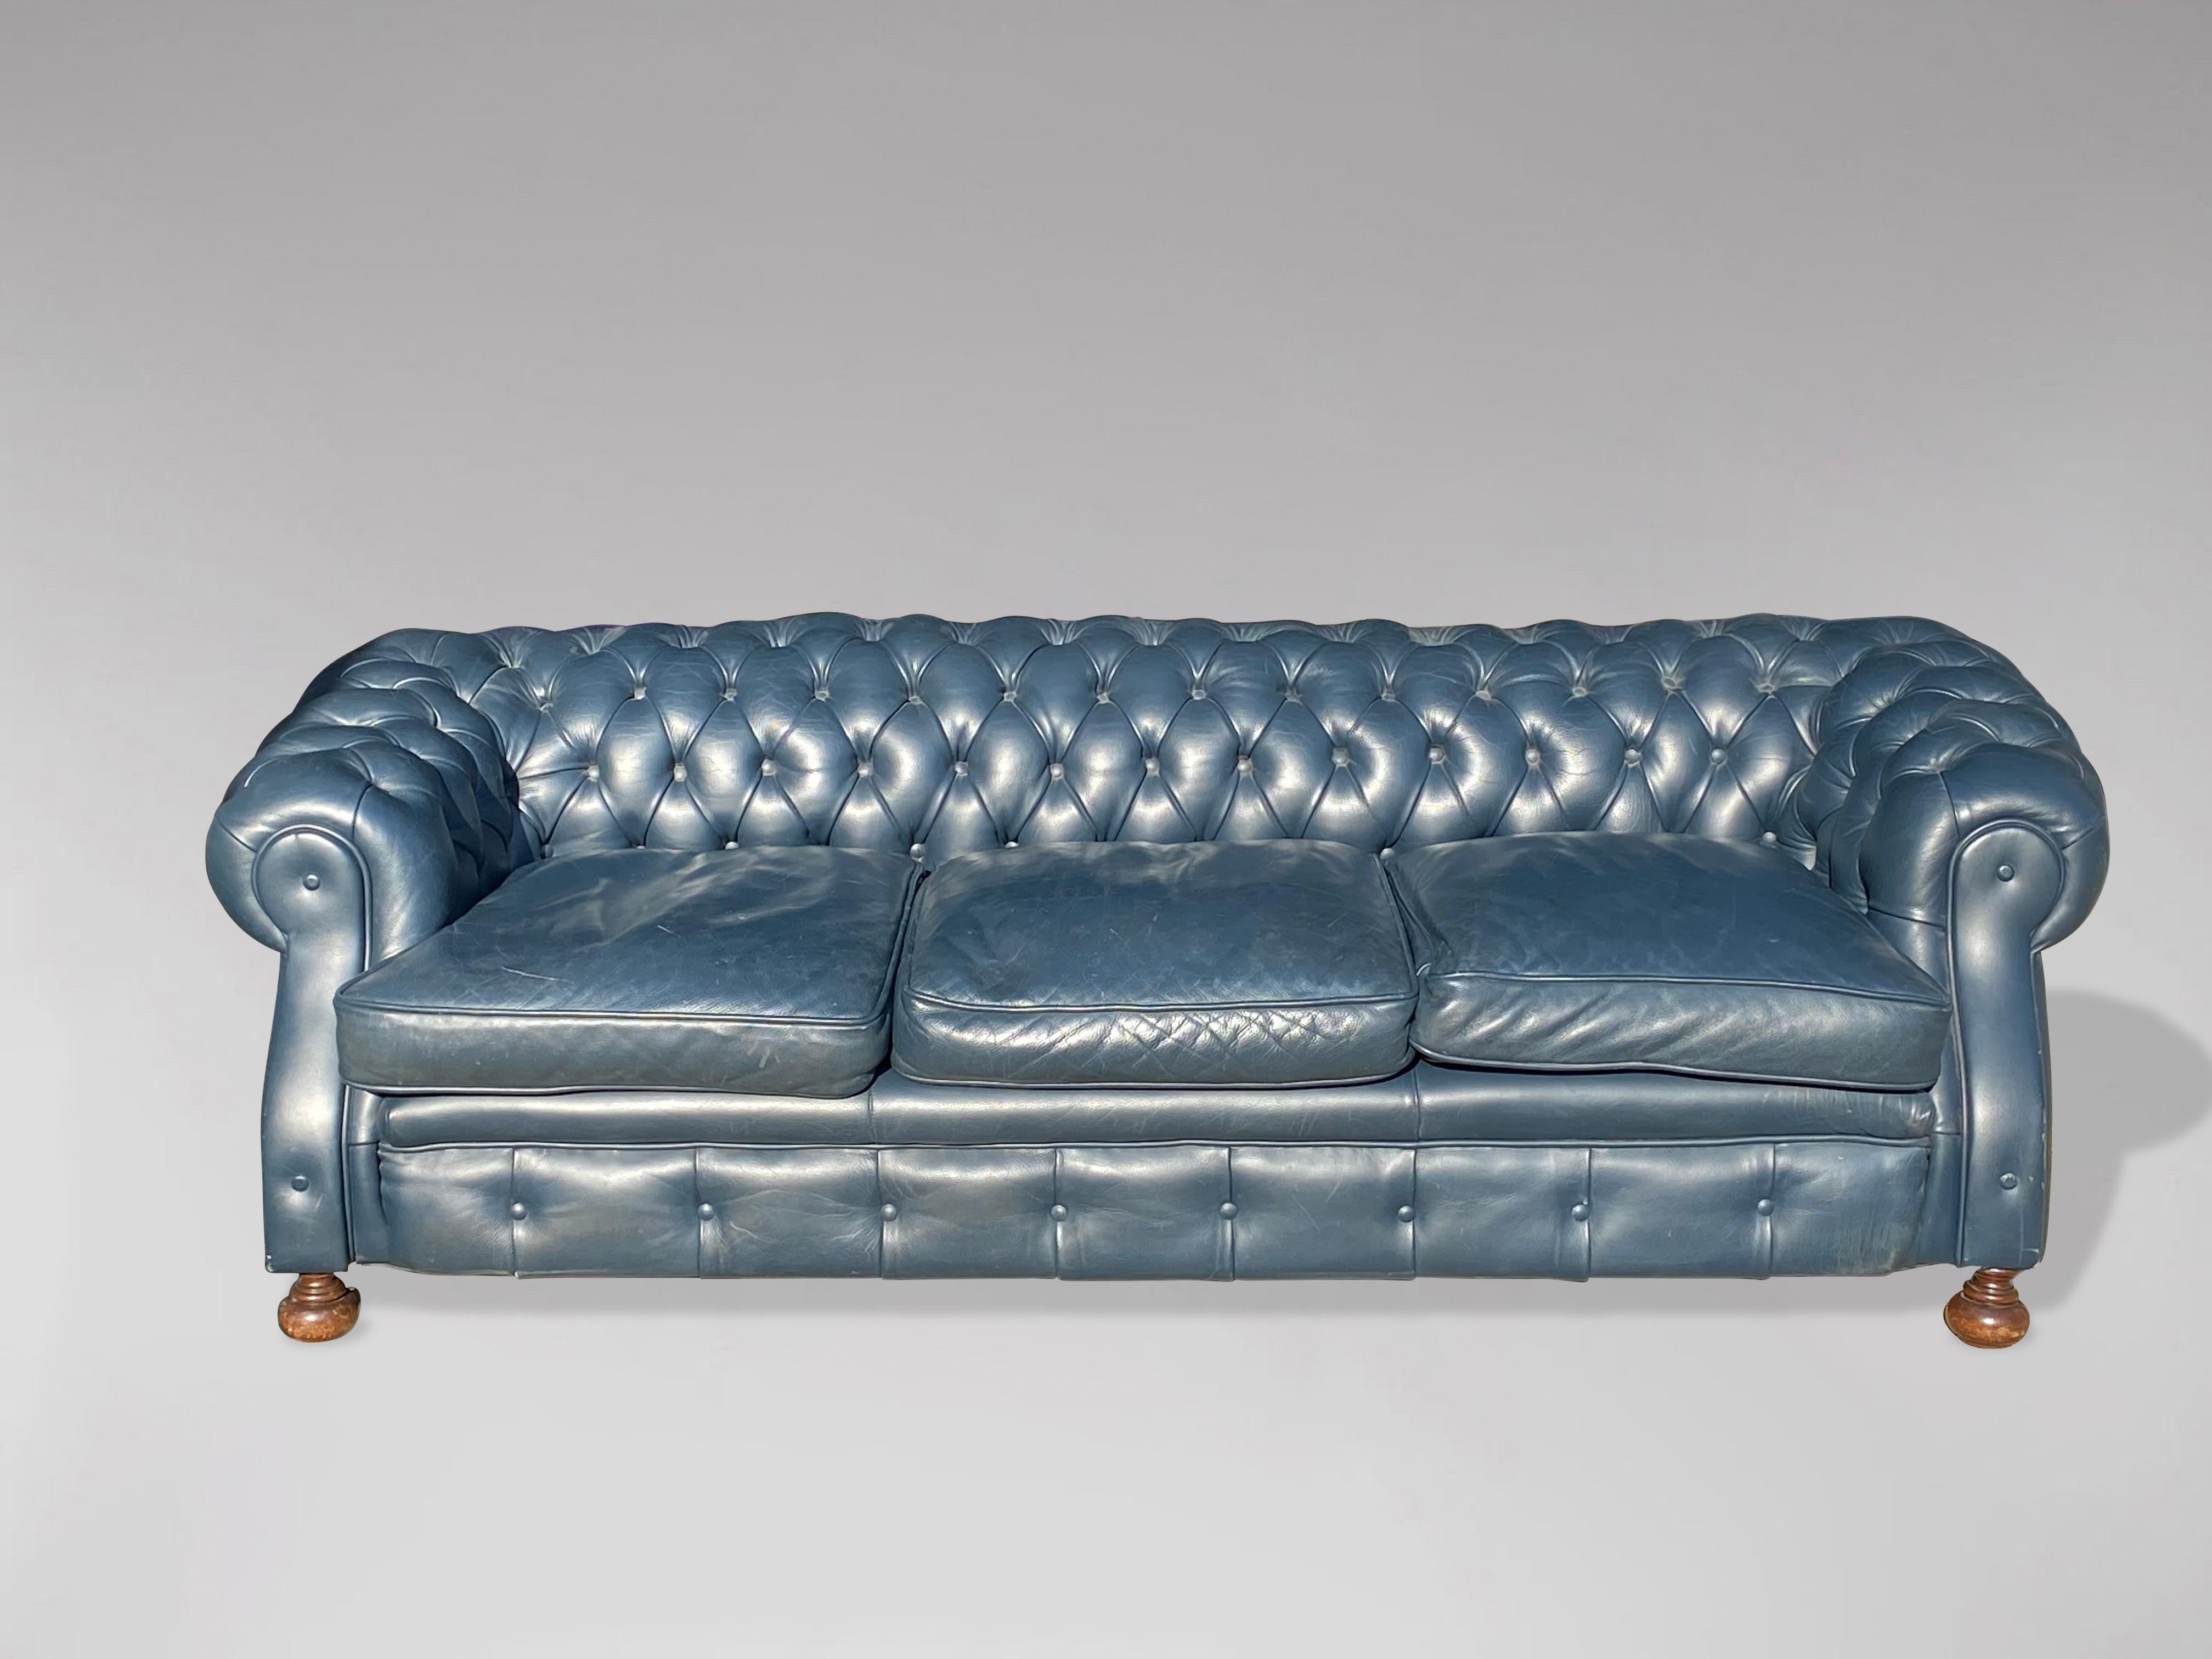 20th Century Stunning Quality Blue Leather 3 Seater Chesterfield Sofa In Good Condition In Petworth,West Sussex, GB